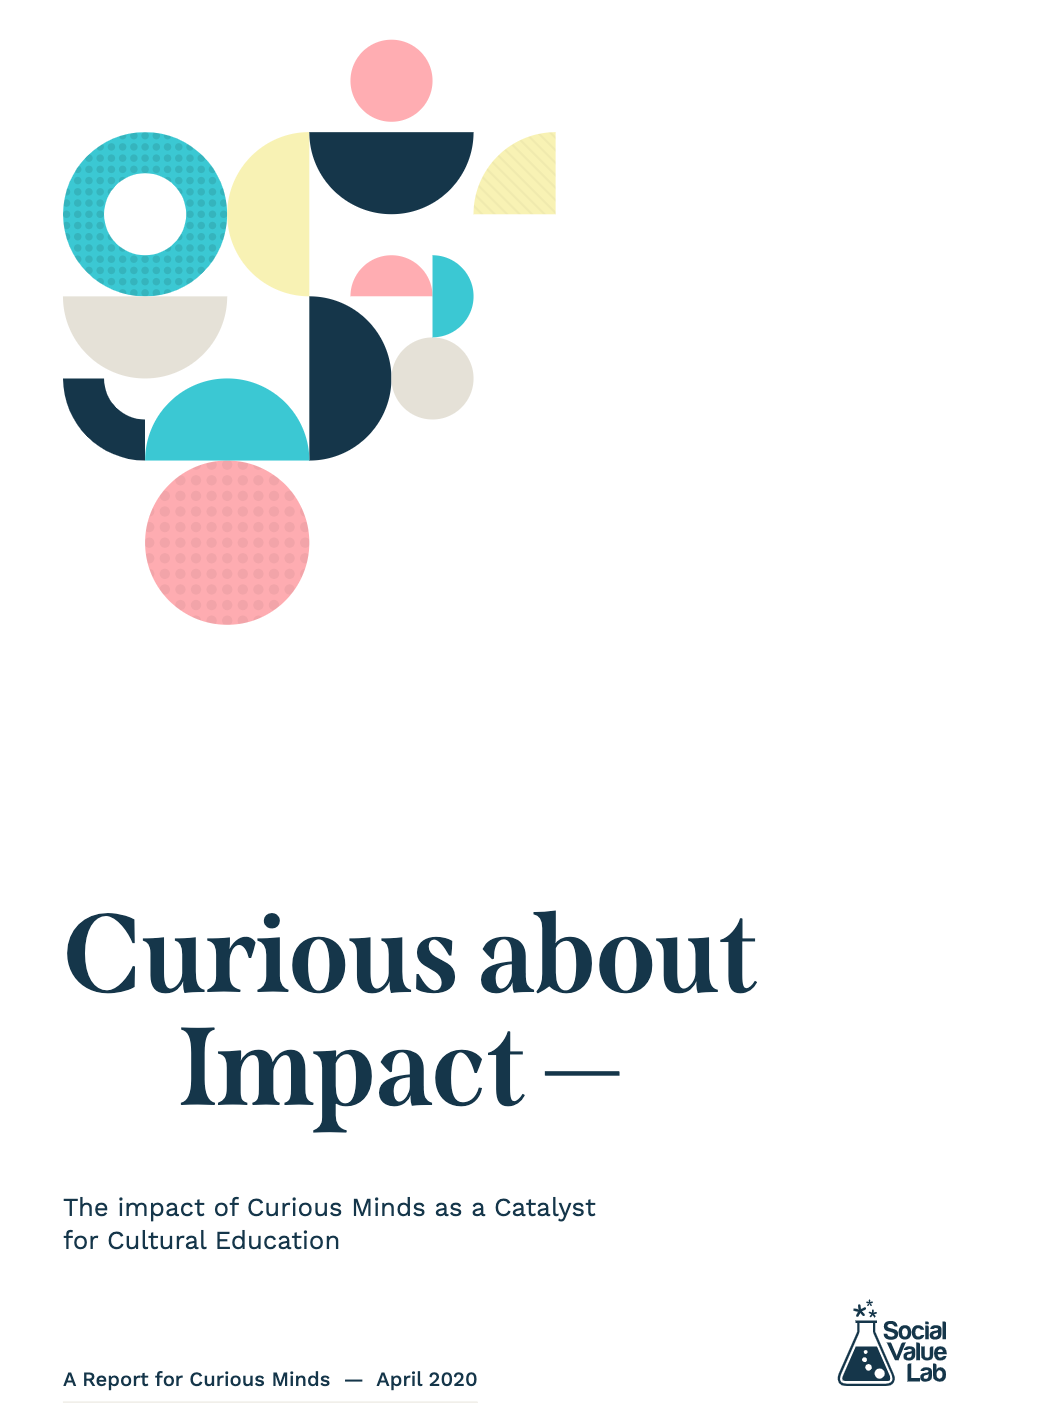 Image of the Social Value Lab report, produced for Curious Minds